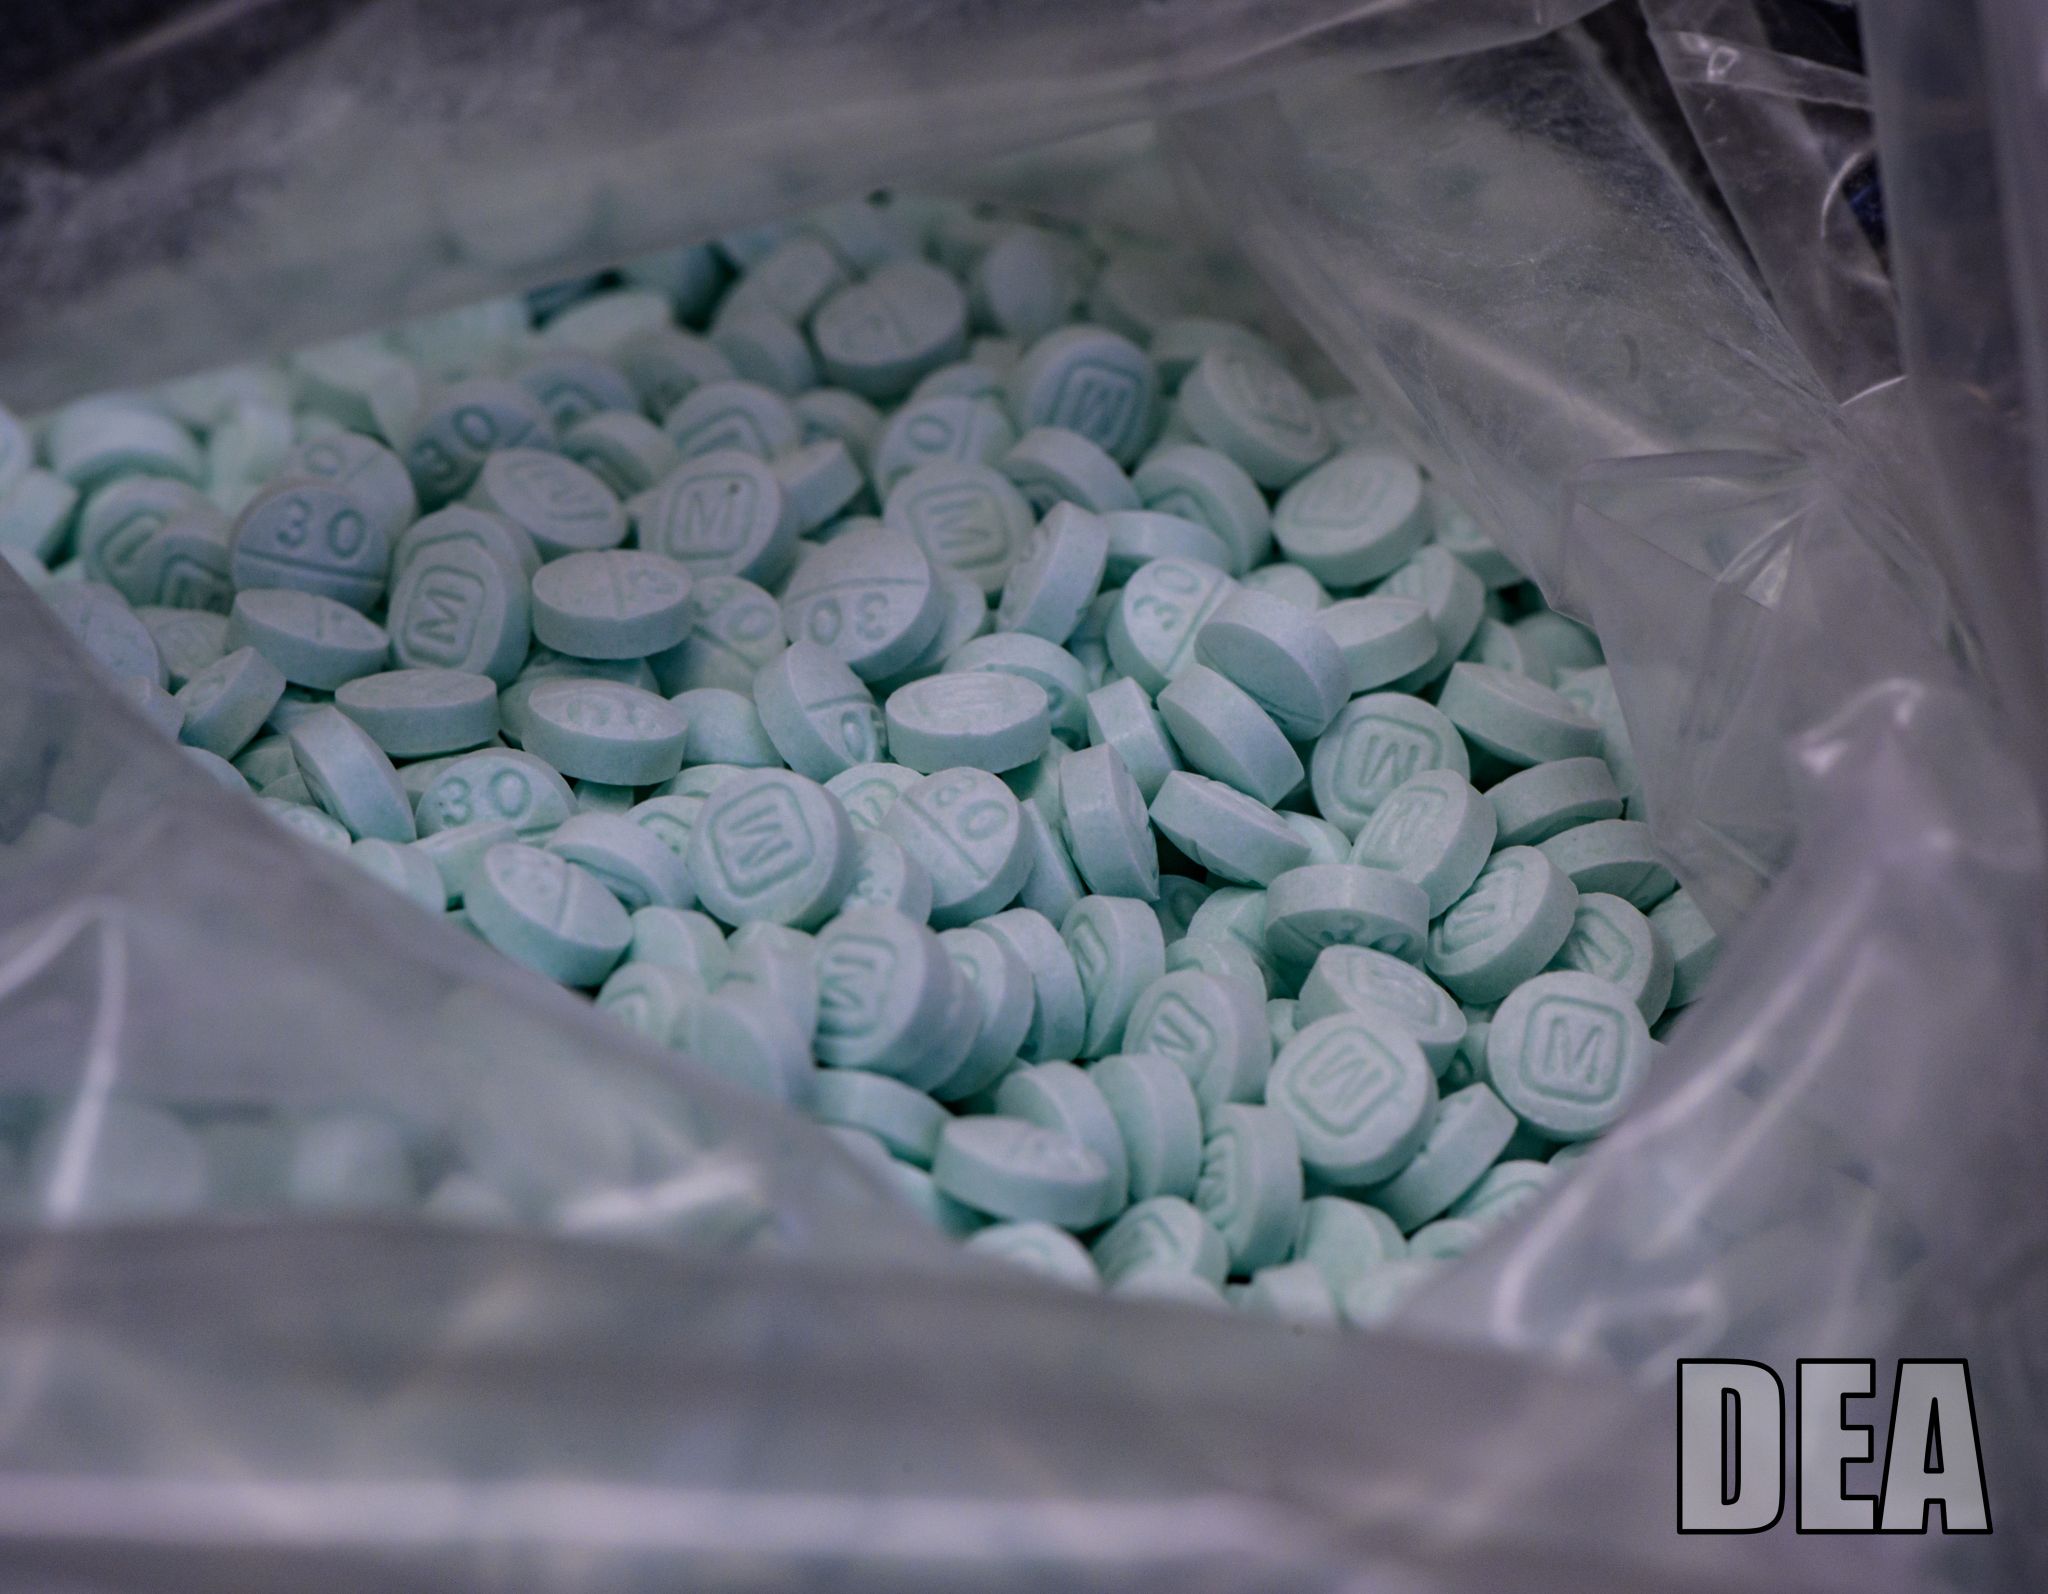 Report says New York was 4th in fentanyl deaths last year